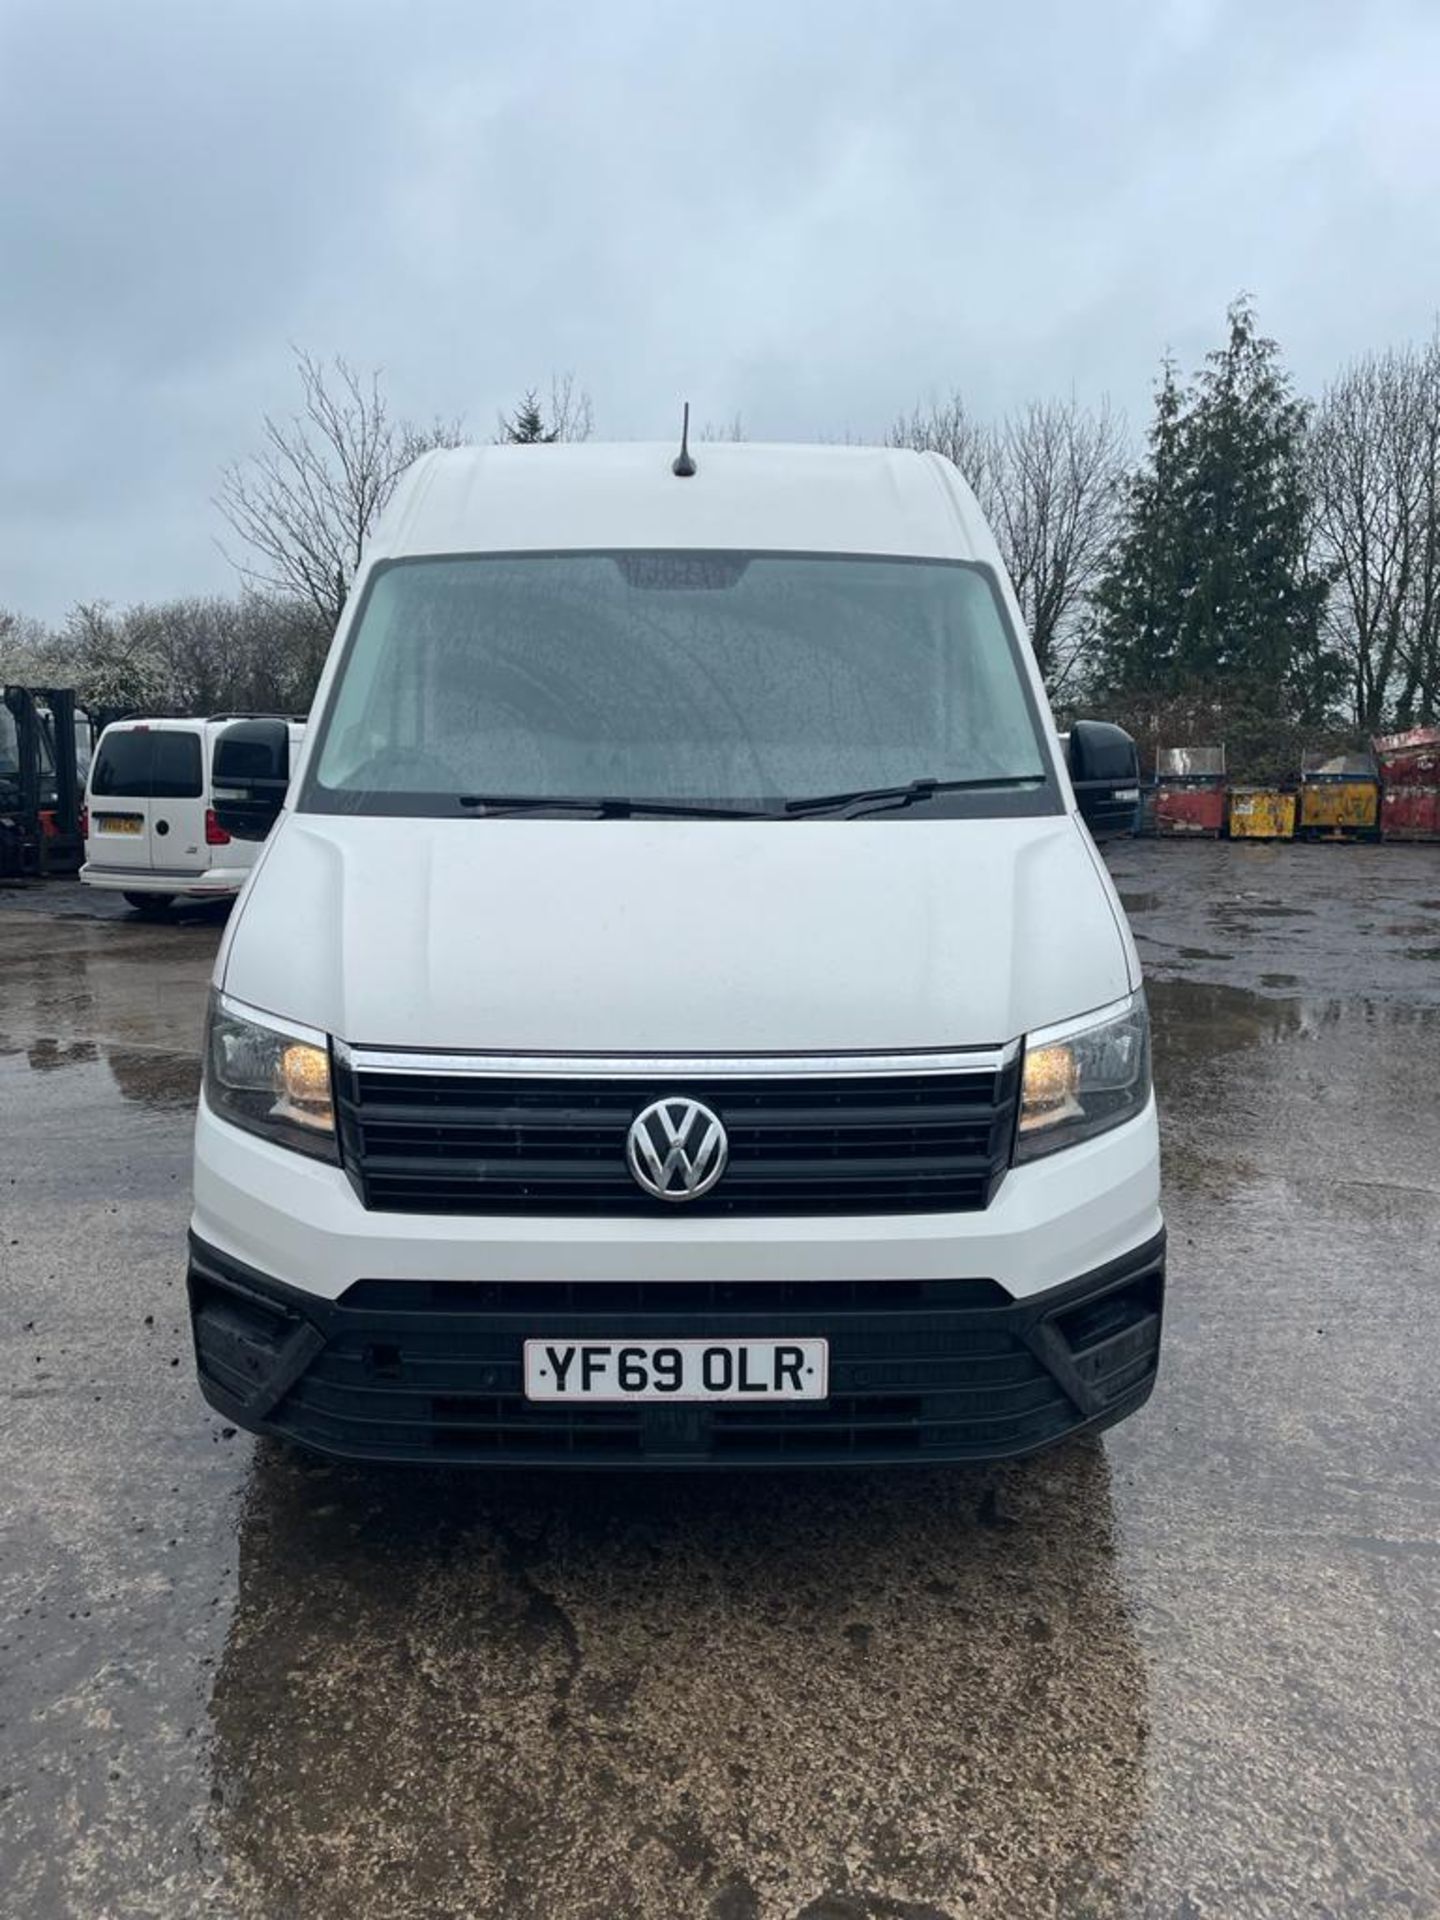 2019 Volkswagen Crafter CR35 TDI Blue Motion - Euro 6 ULEZ Compliant - Image 3 of 8